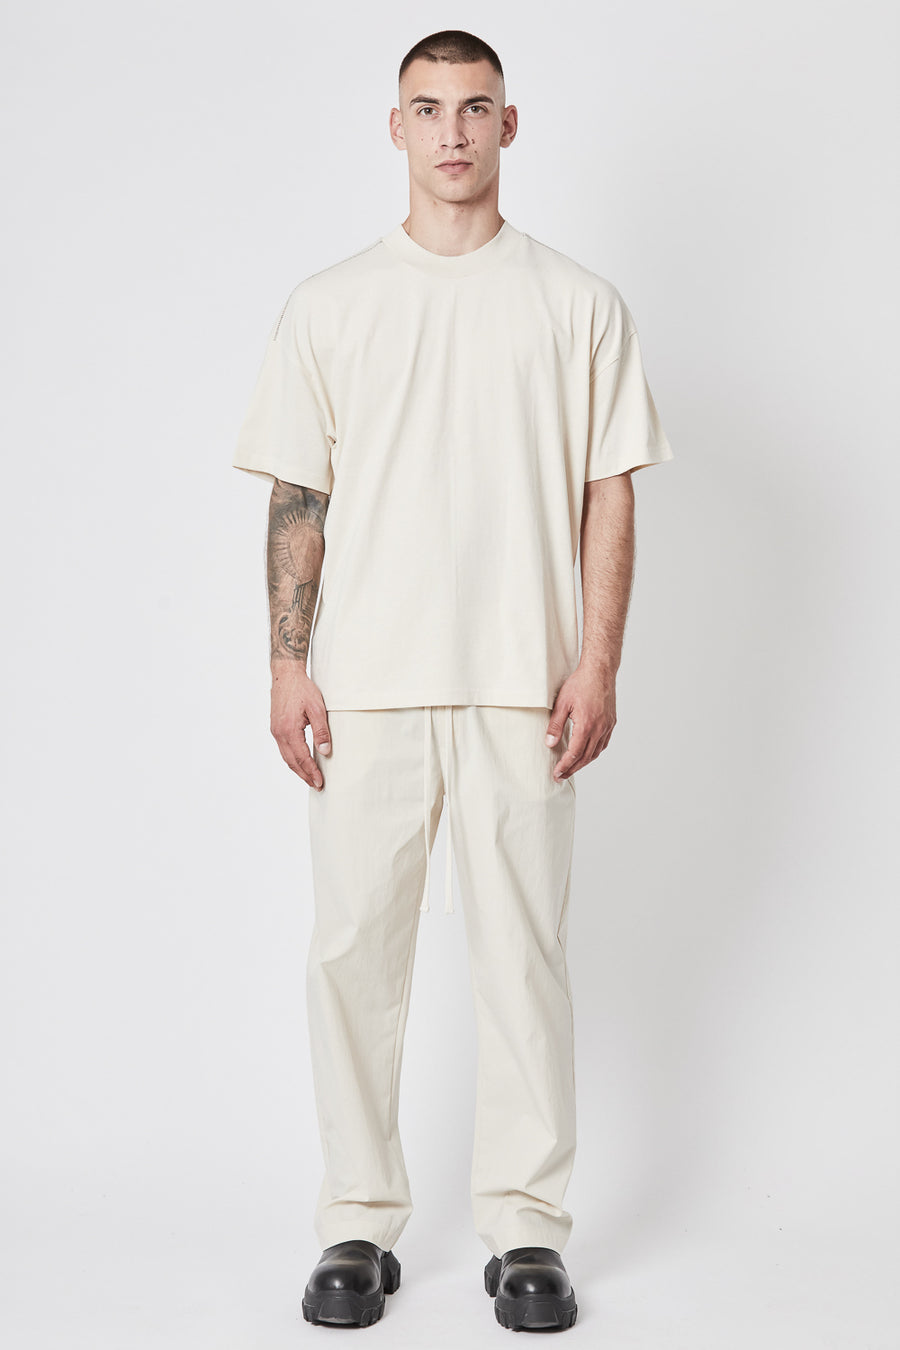 Buy the Thom Krom M TS 717 T-Shirt in Ivory at Intro. Spend £50 for free UK delivery. Official stockists. We ship worldwide.